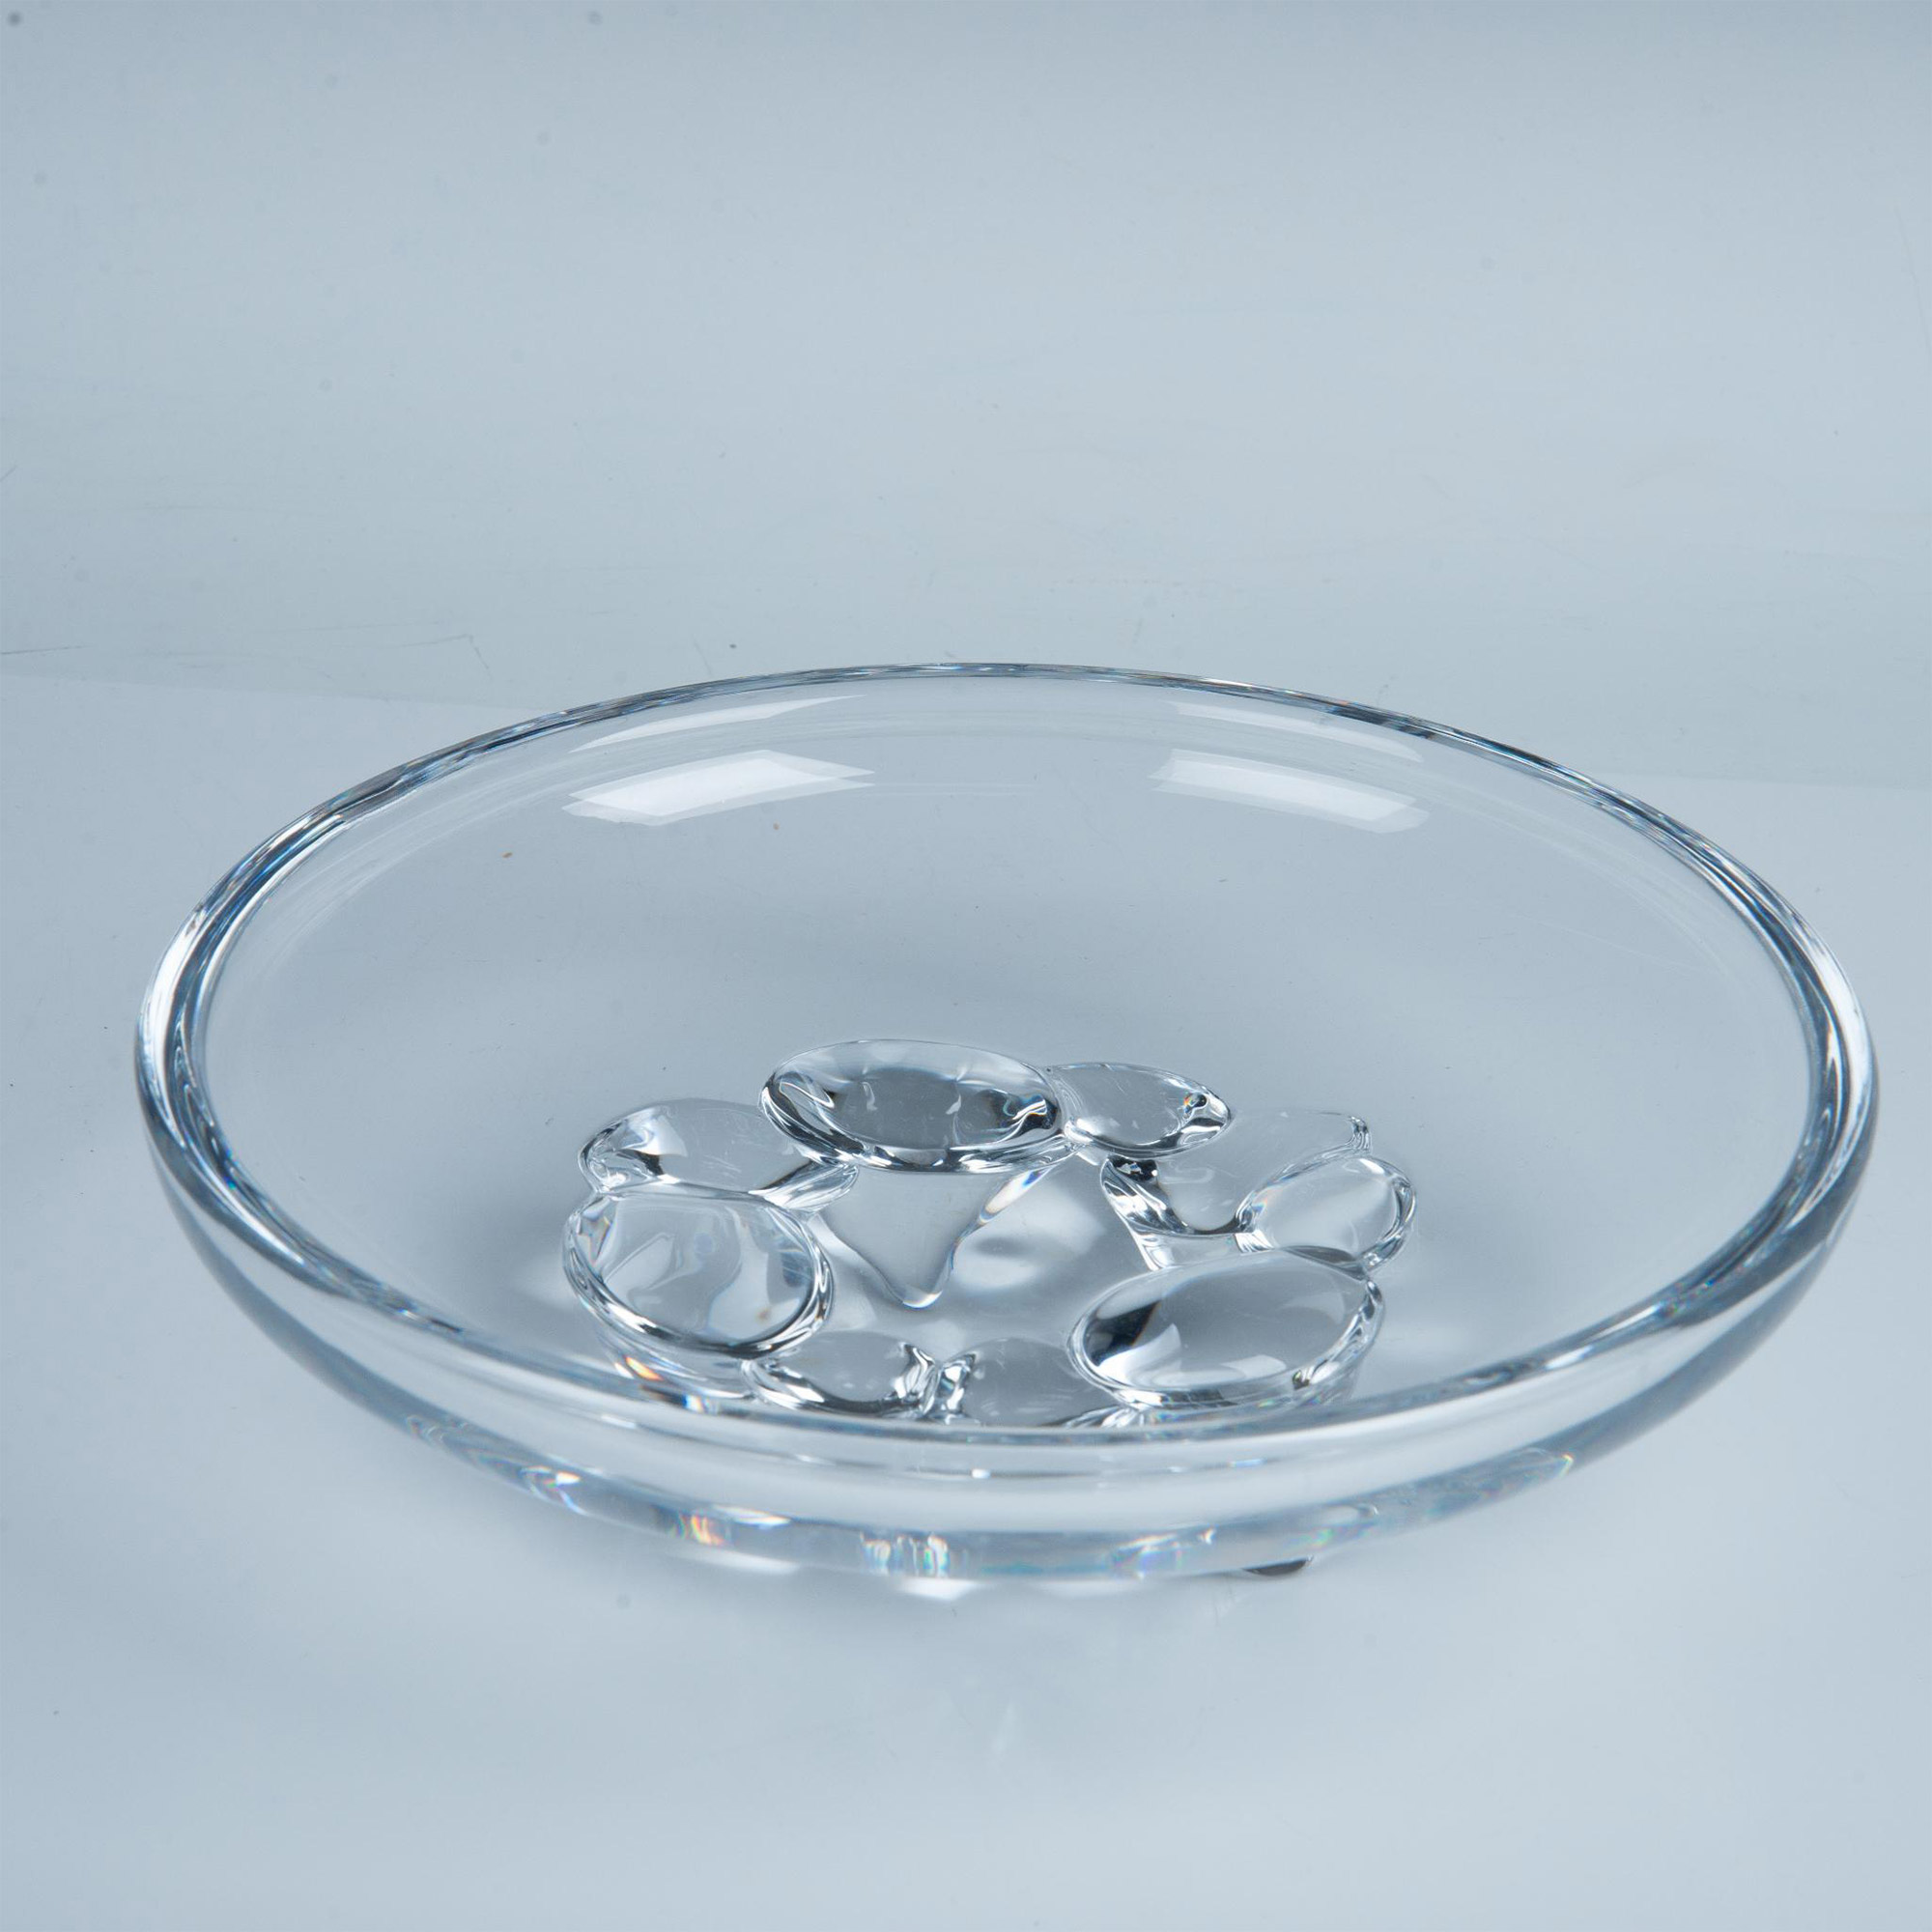 Daum Nancy Crystal Centerpiece Bowl with Conical Feet